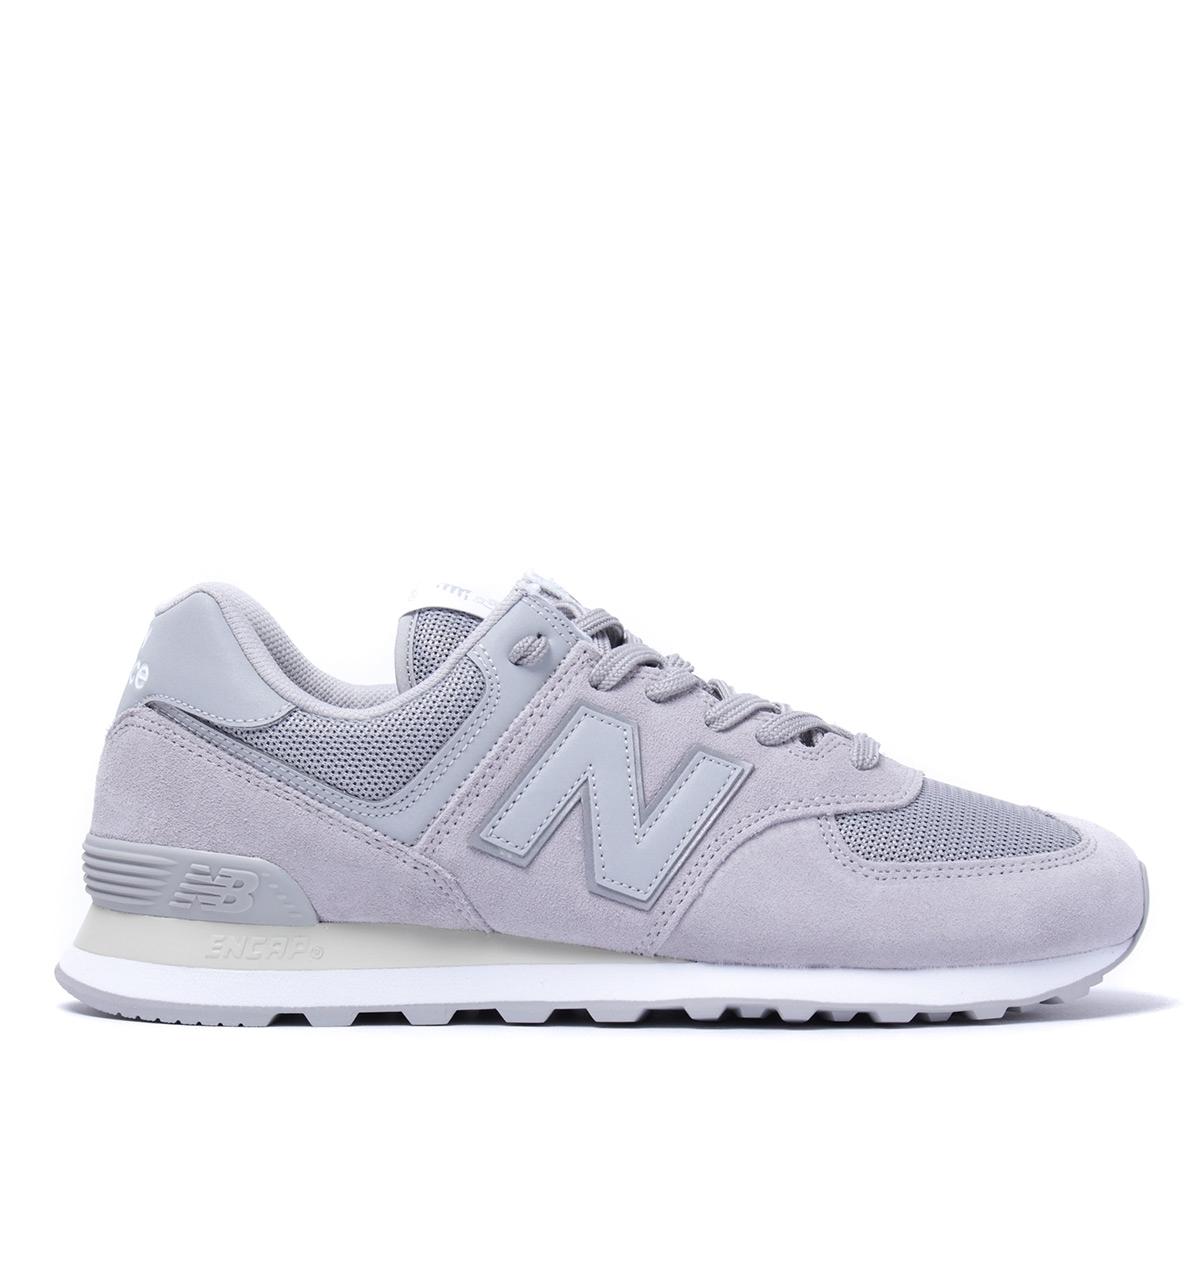 New Balance 574 Light Grey Suede Trainers in Gray for Men - Lyst